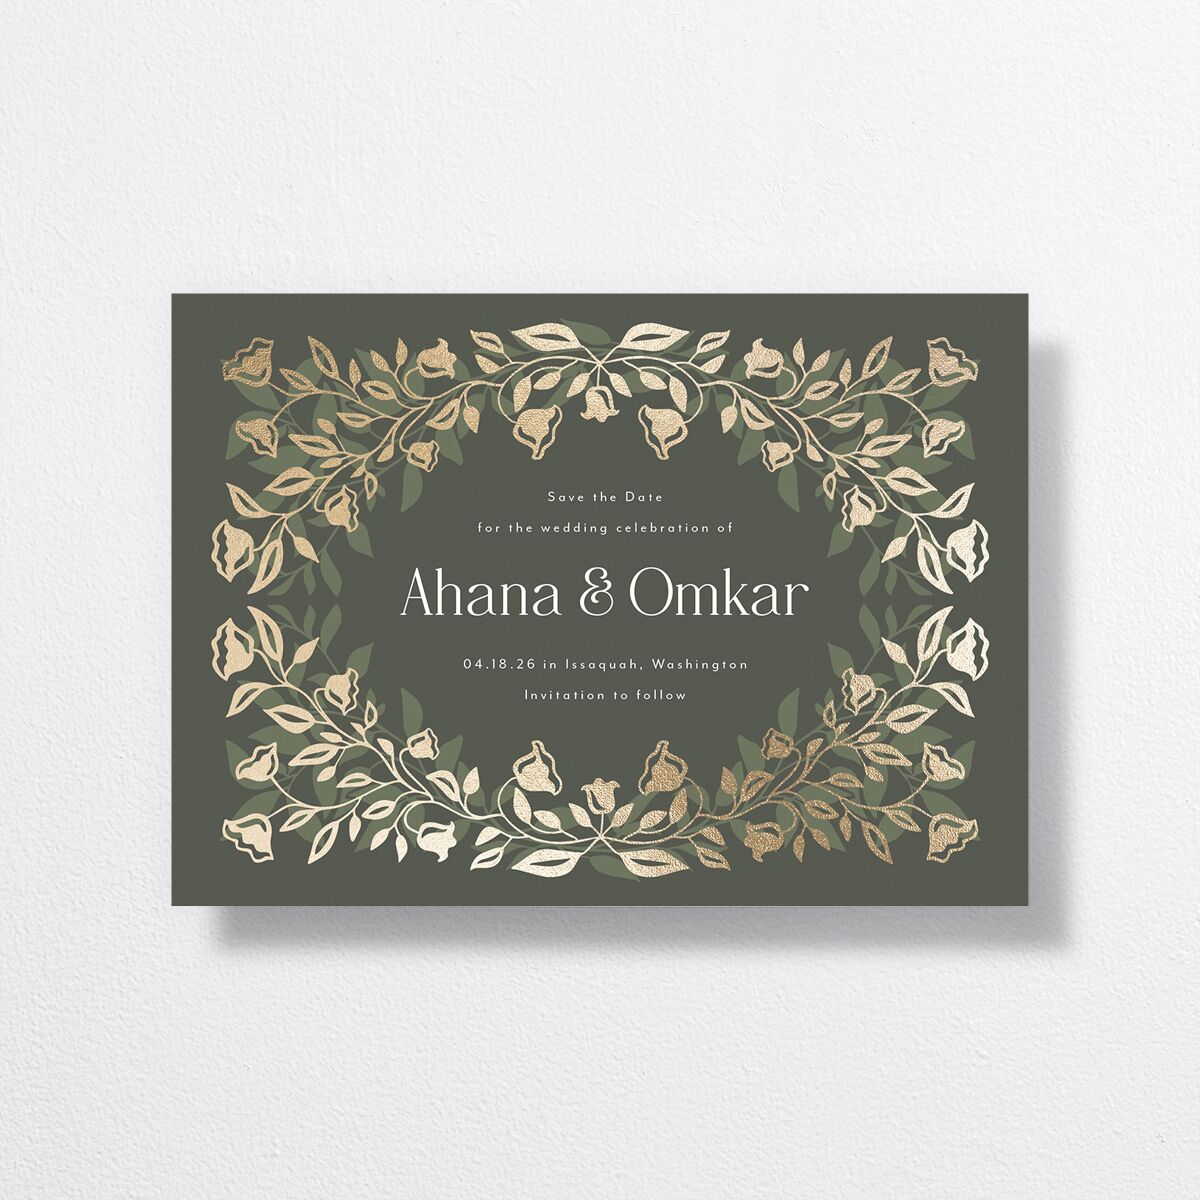 Rustic Nouveau Save the Date Cards front